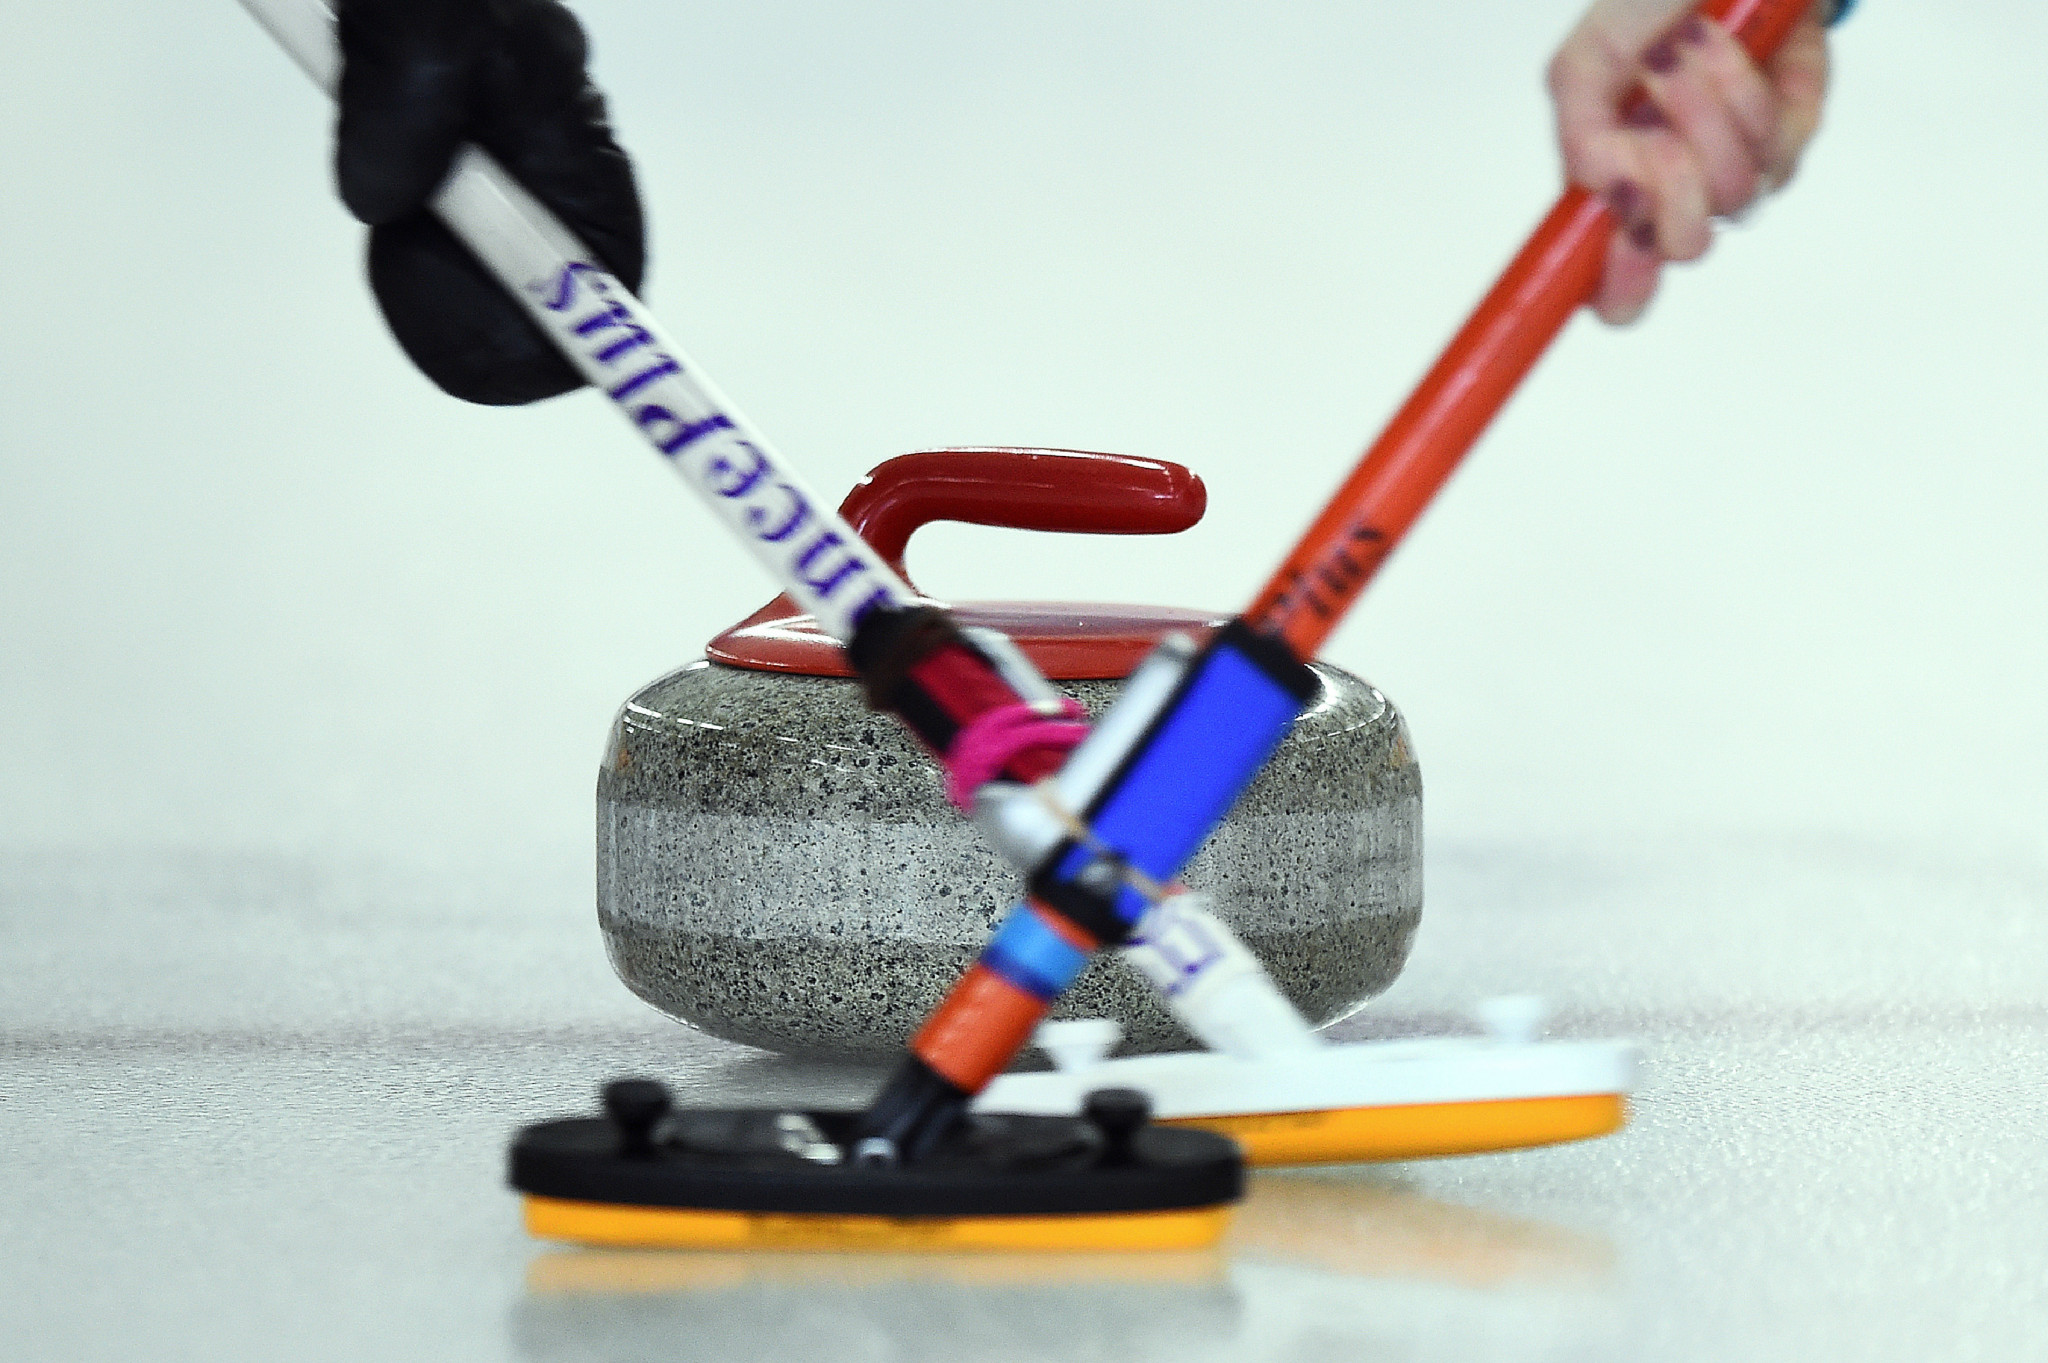 World Curling Federation calls for nominations to fill commission vacancies